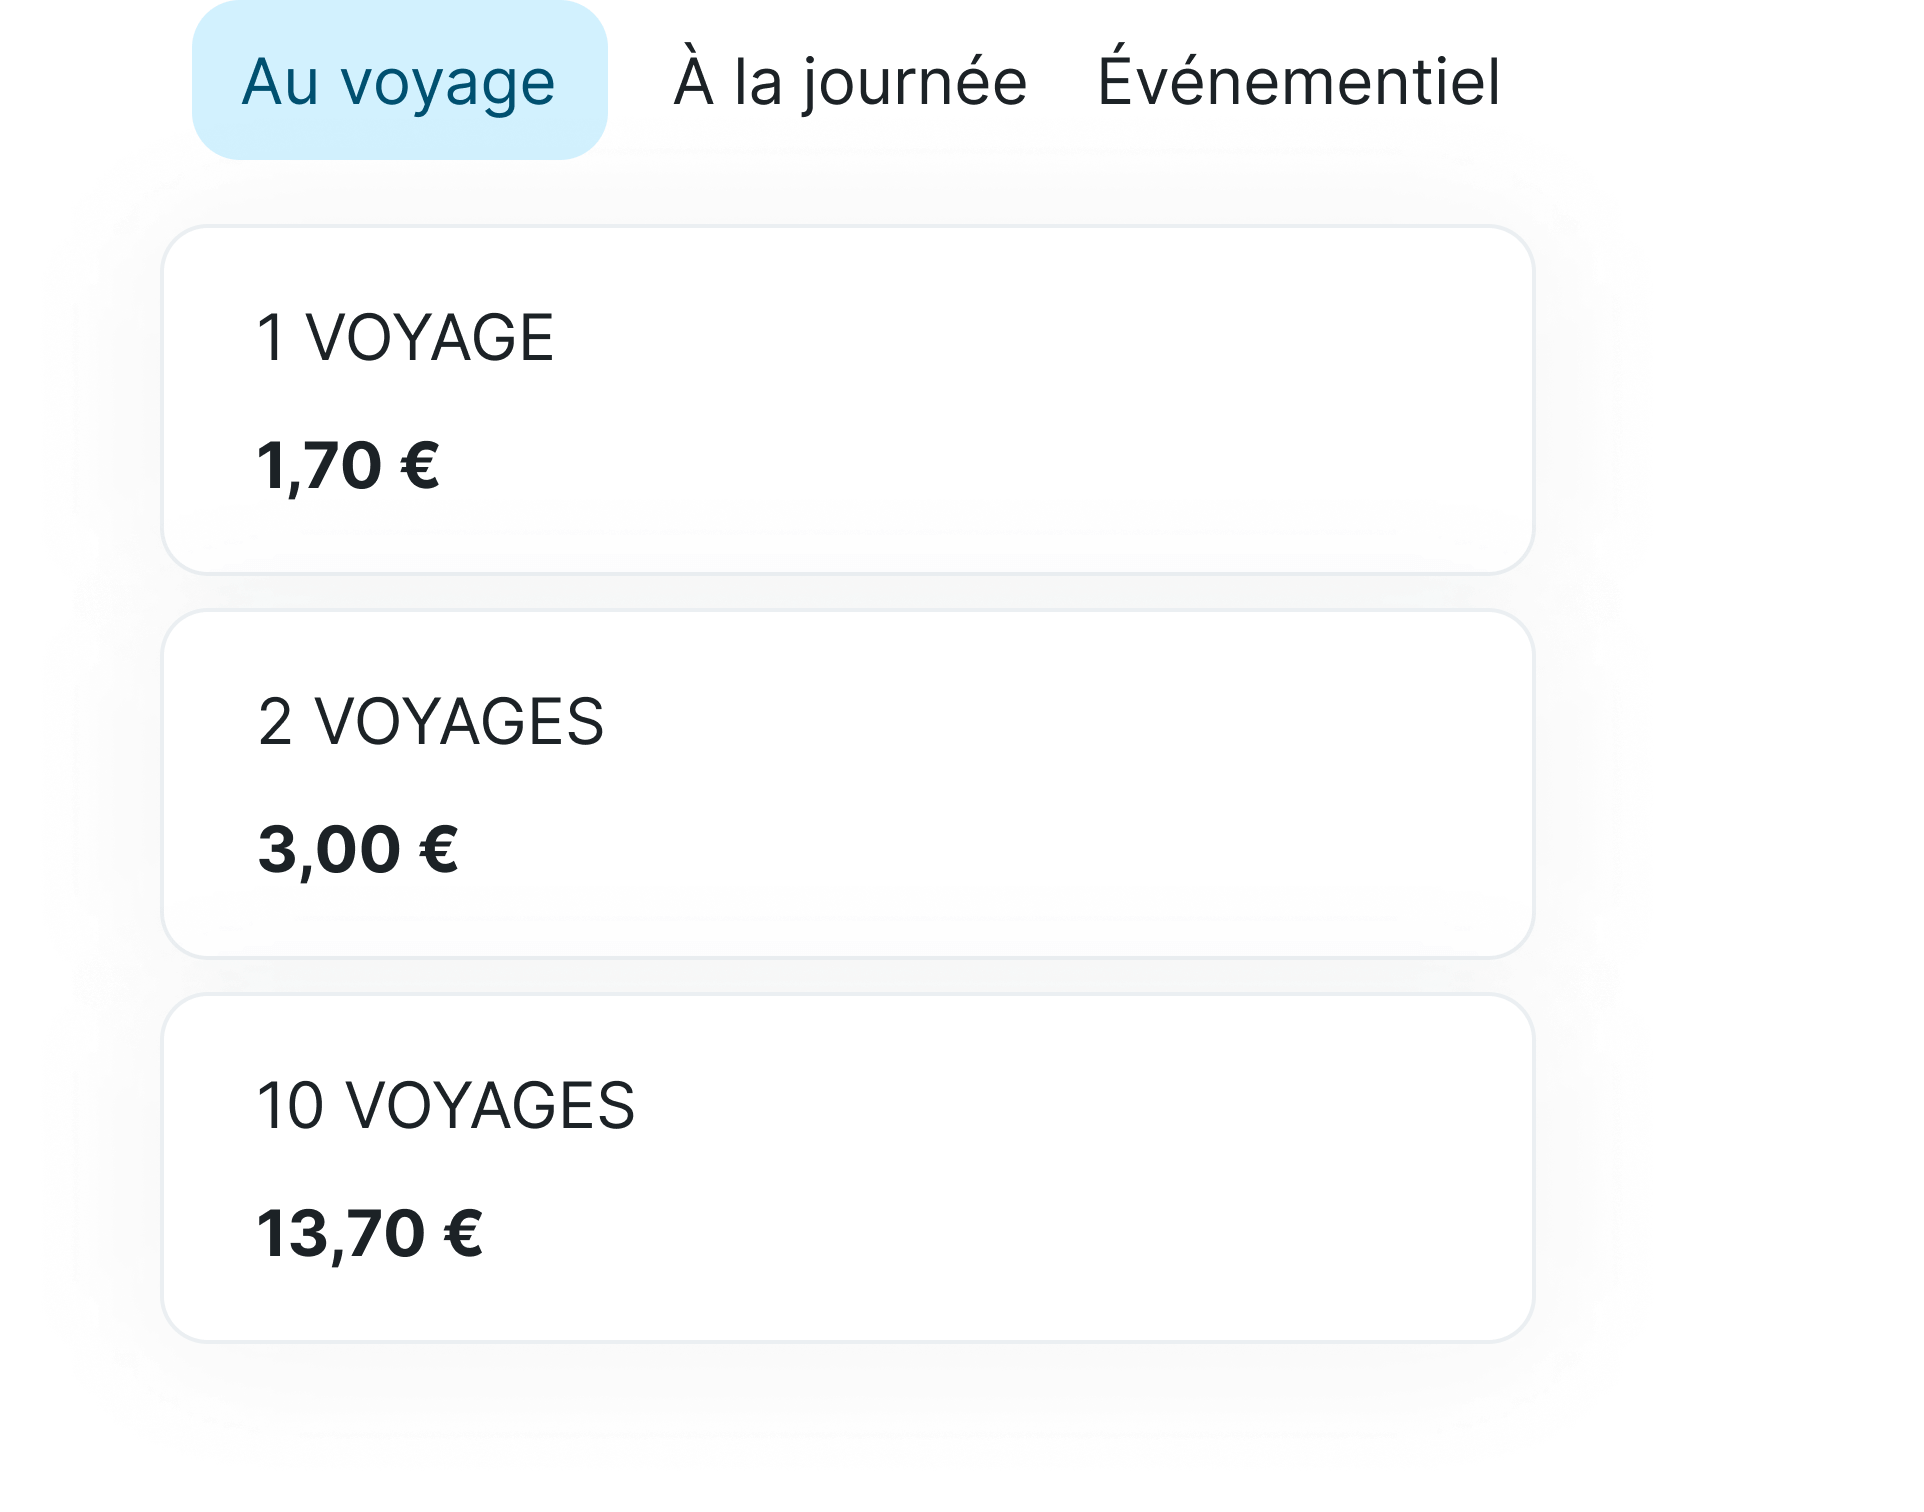 Proposals of several tickets with different prices according to the number of trips